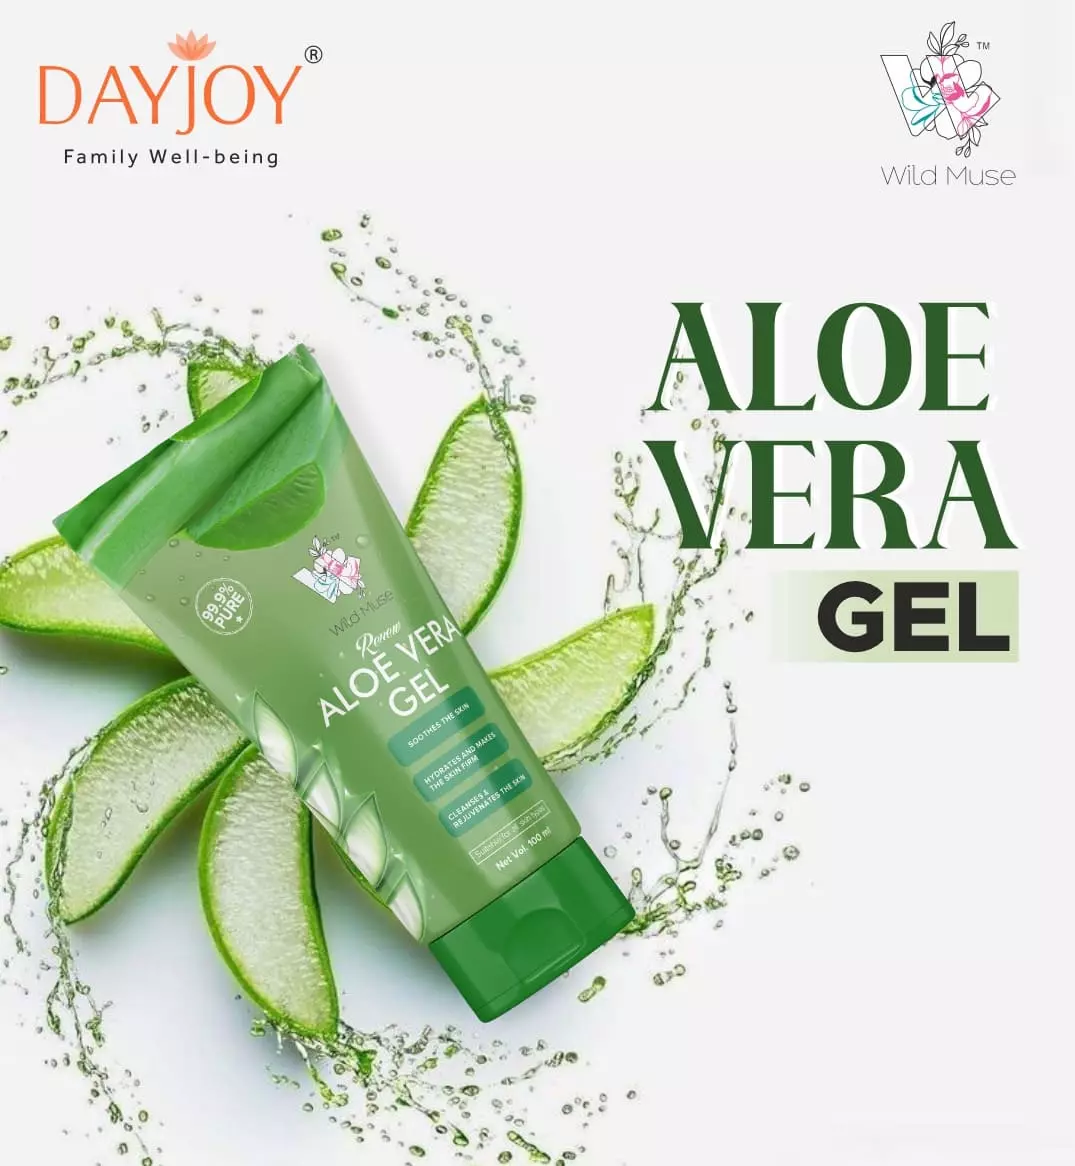 Aloevera Gel- treat and hydrate you skin with natural aloevera extract.